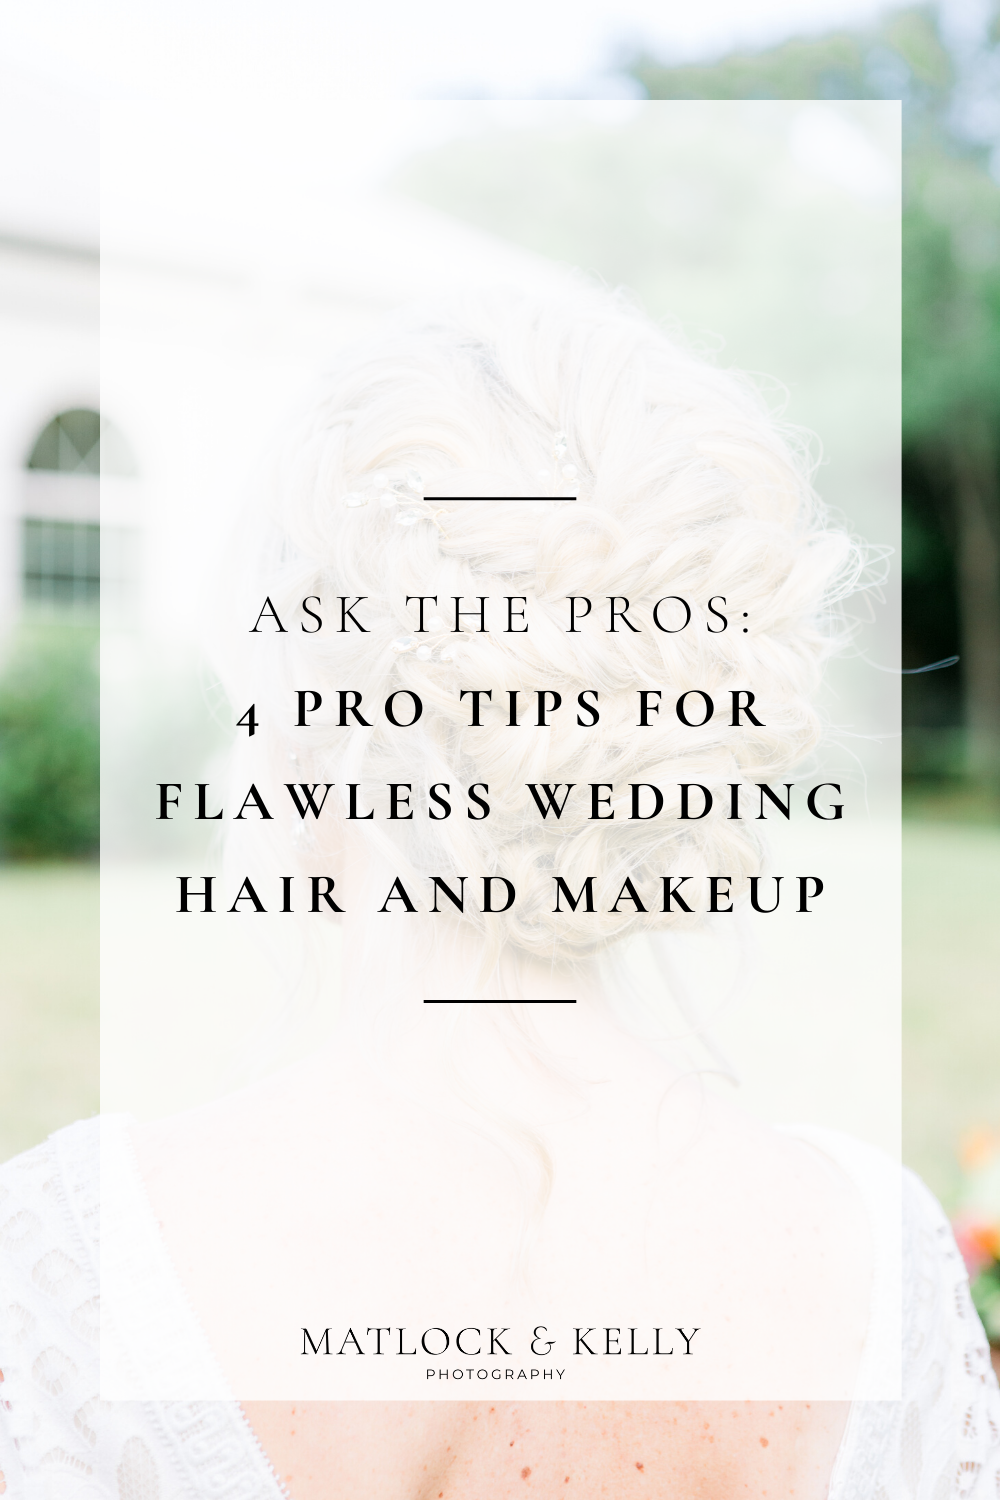 4 pro tips for flawless wedding hair and makeup!